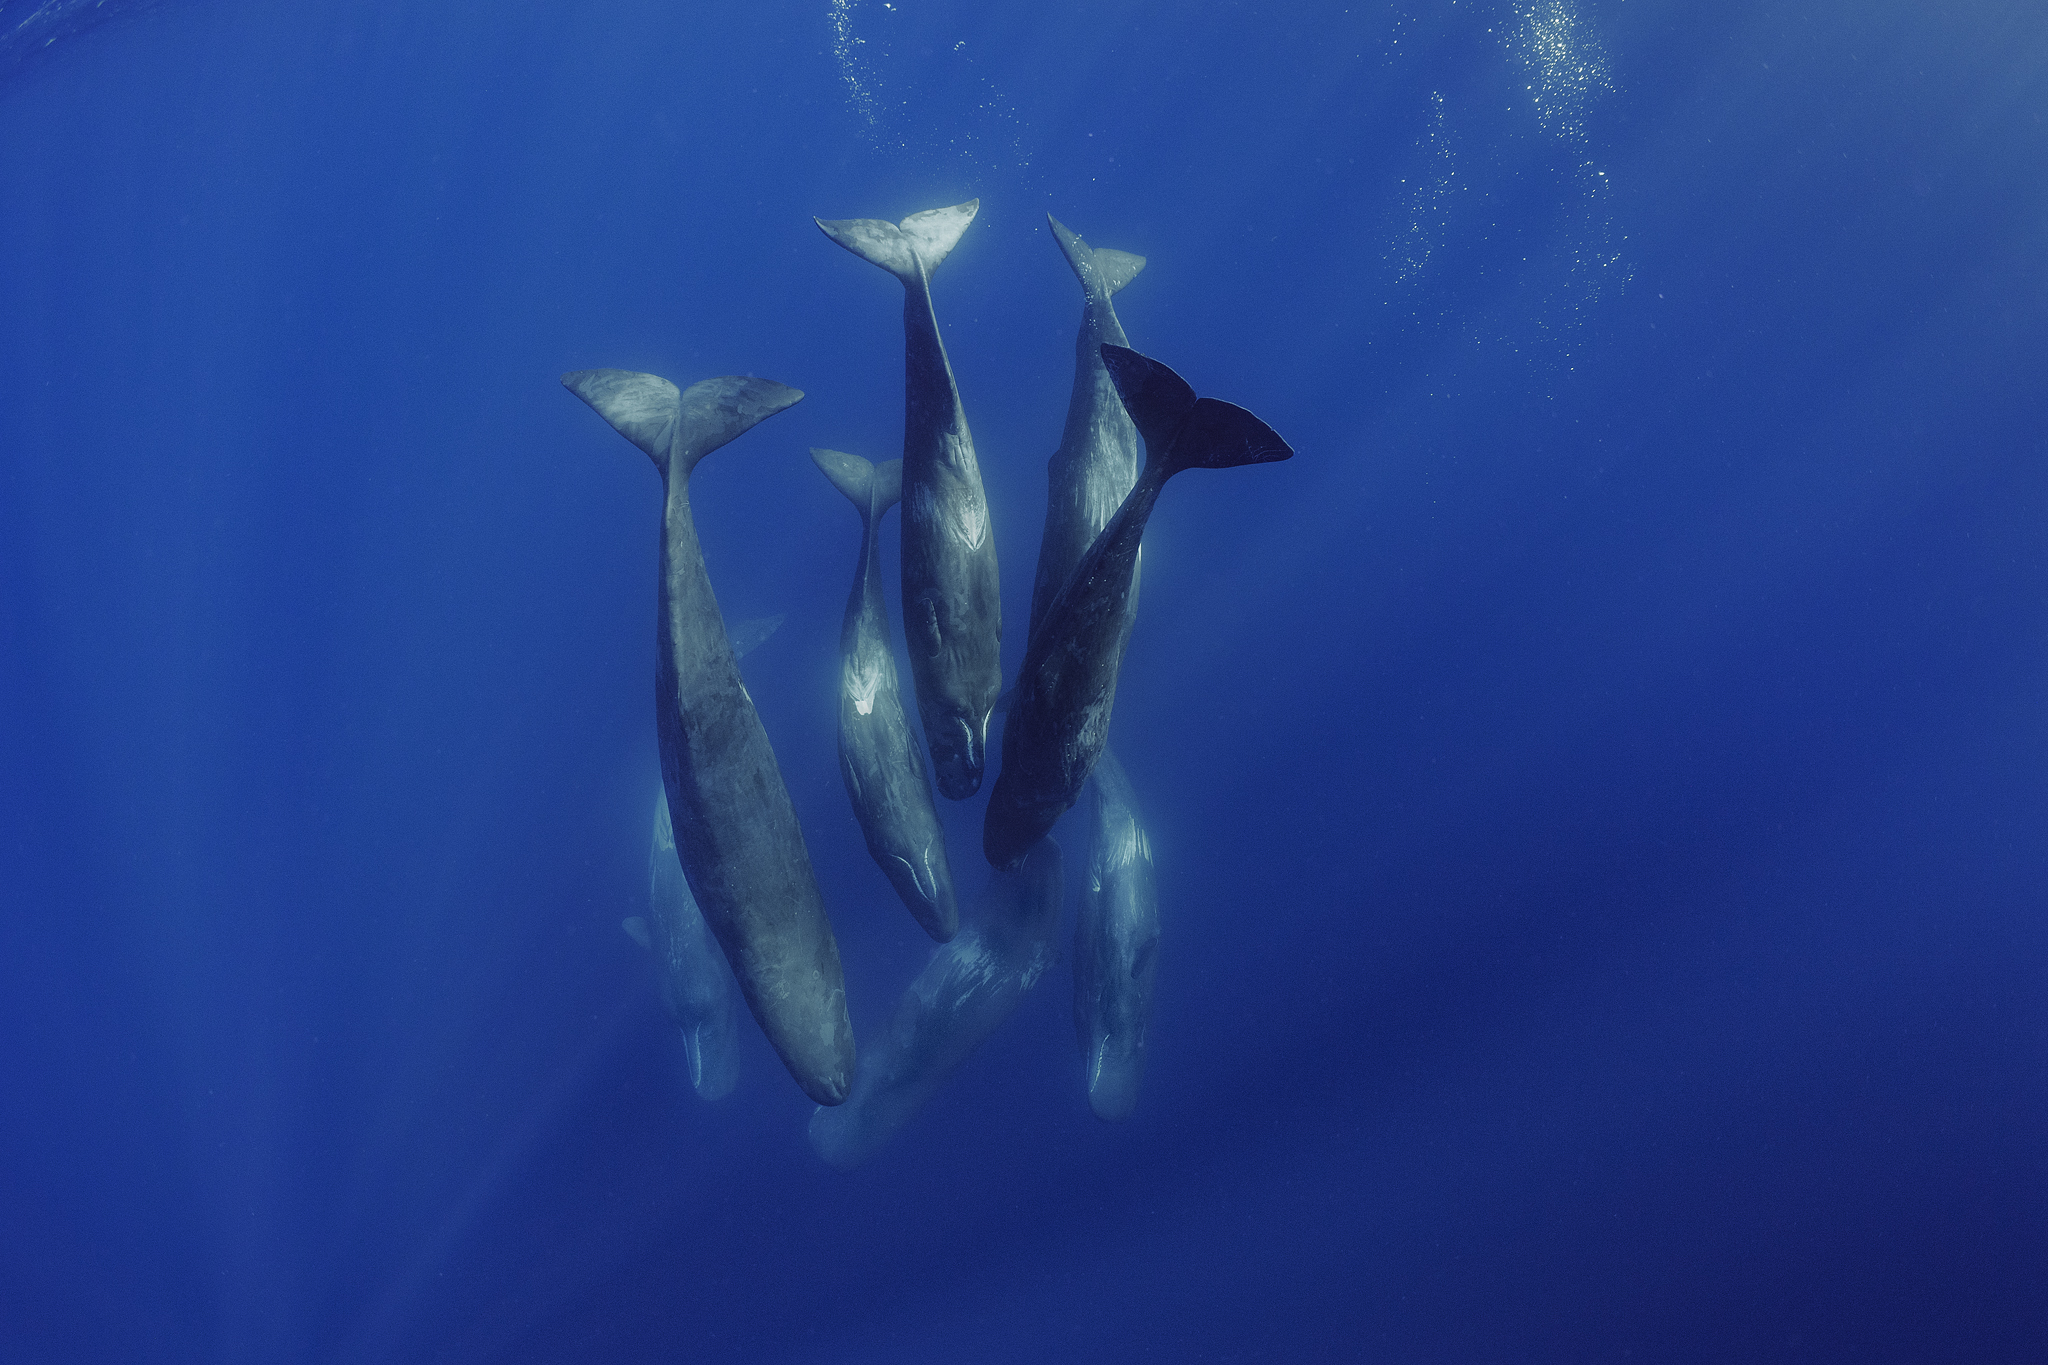 A family unit of sperm whales socializing underwater off the island of Faial in the Azores. (Brian Skerry)